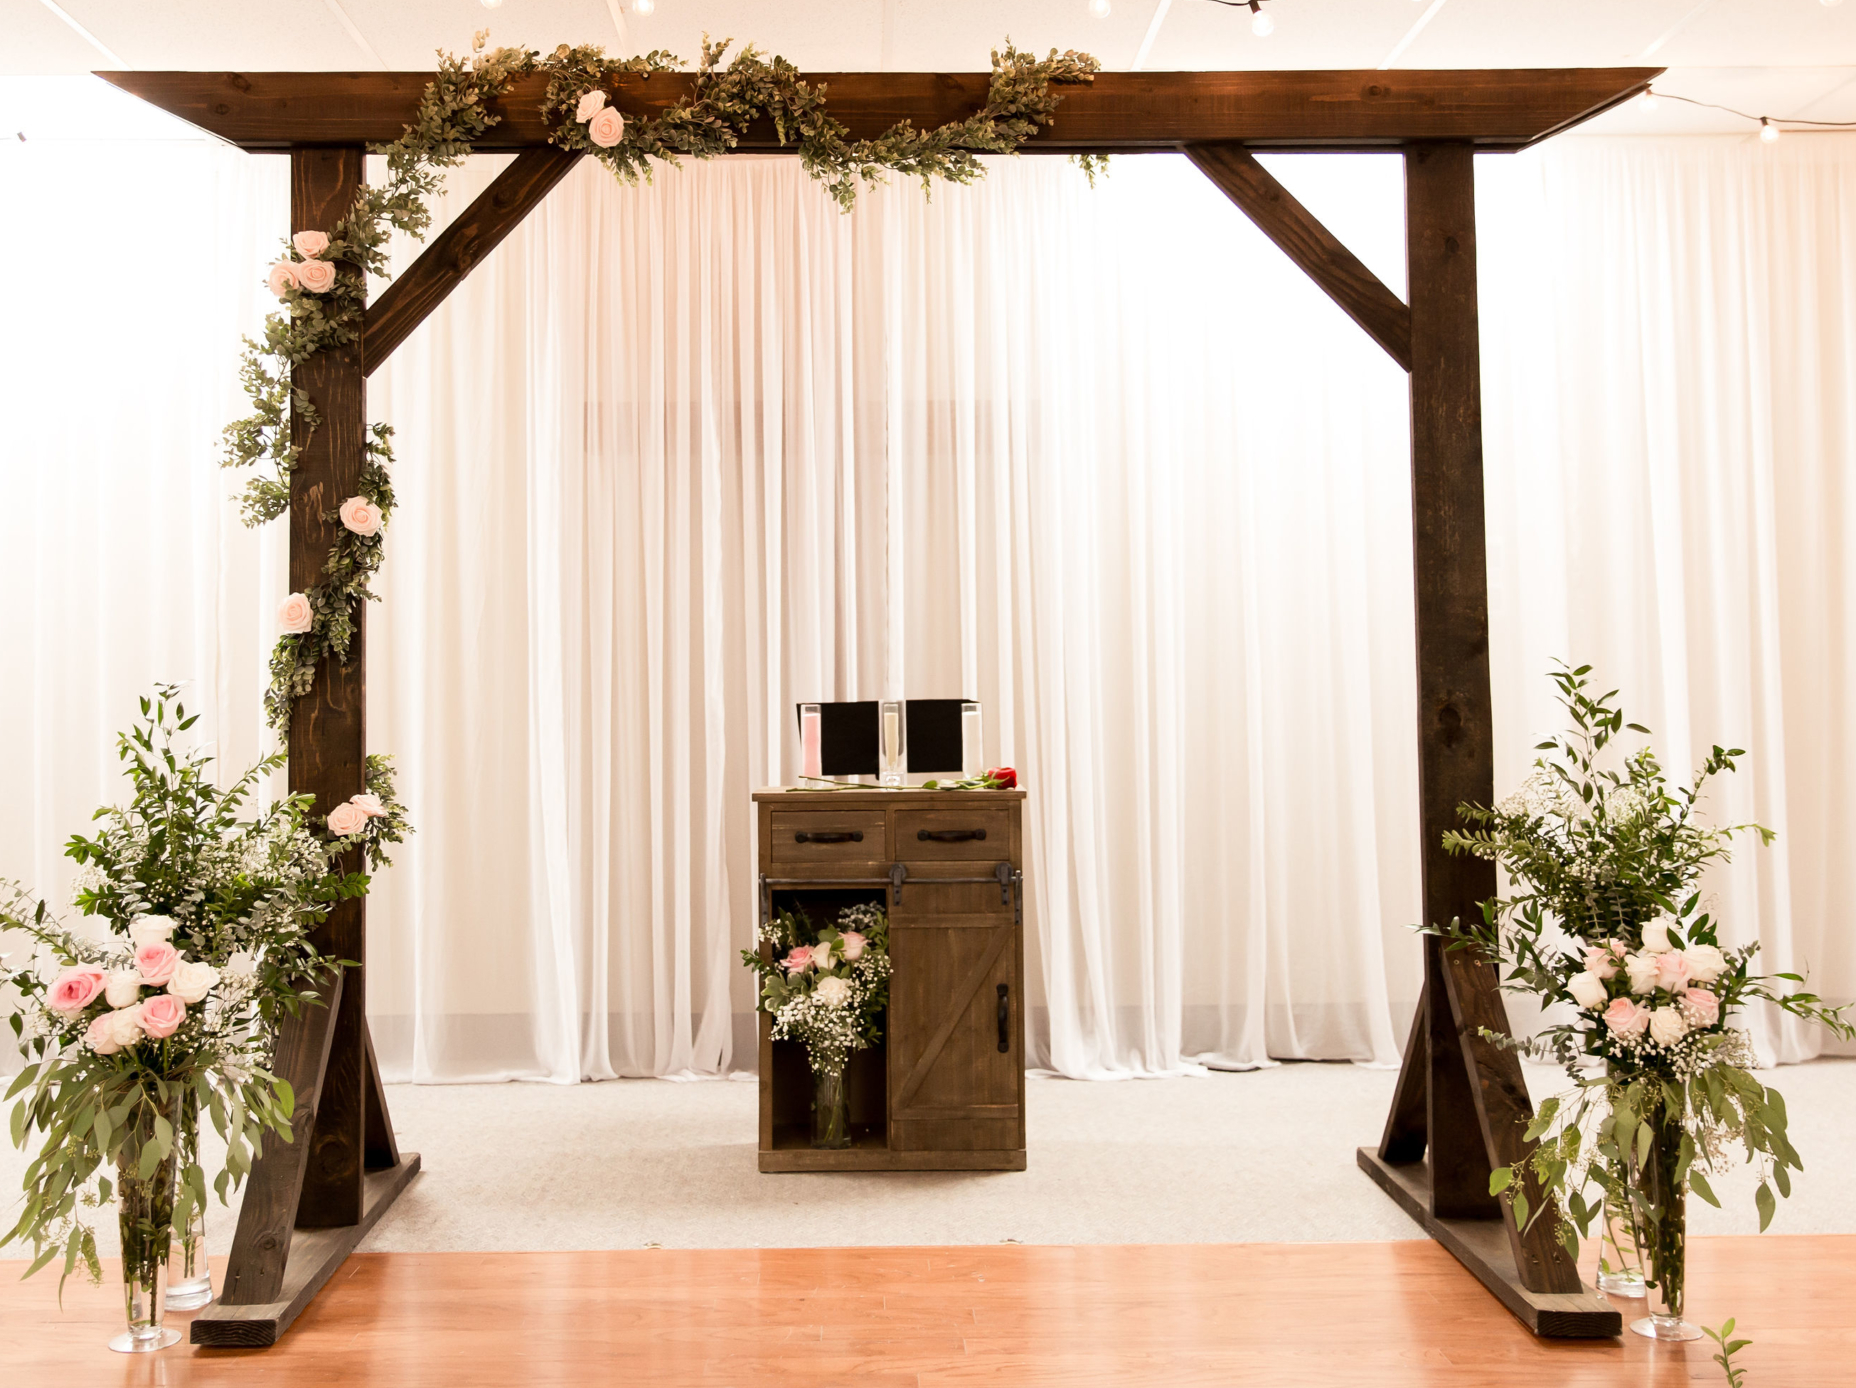 My fiancé and I really wanted a big wooden arch or arbor for our wedding in...